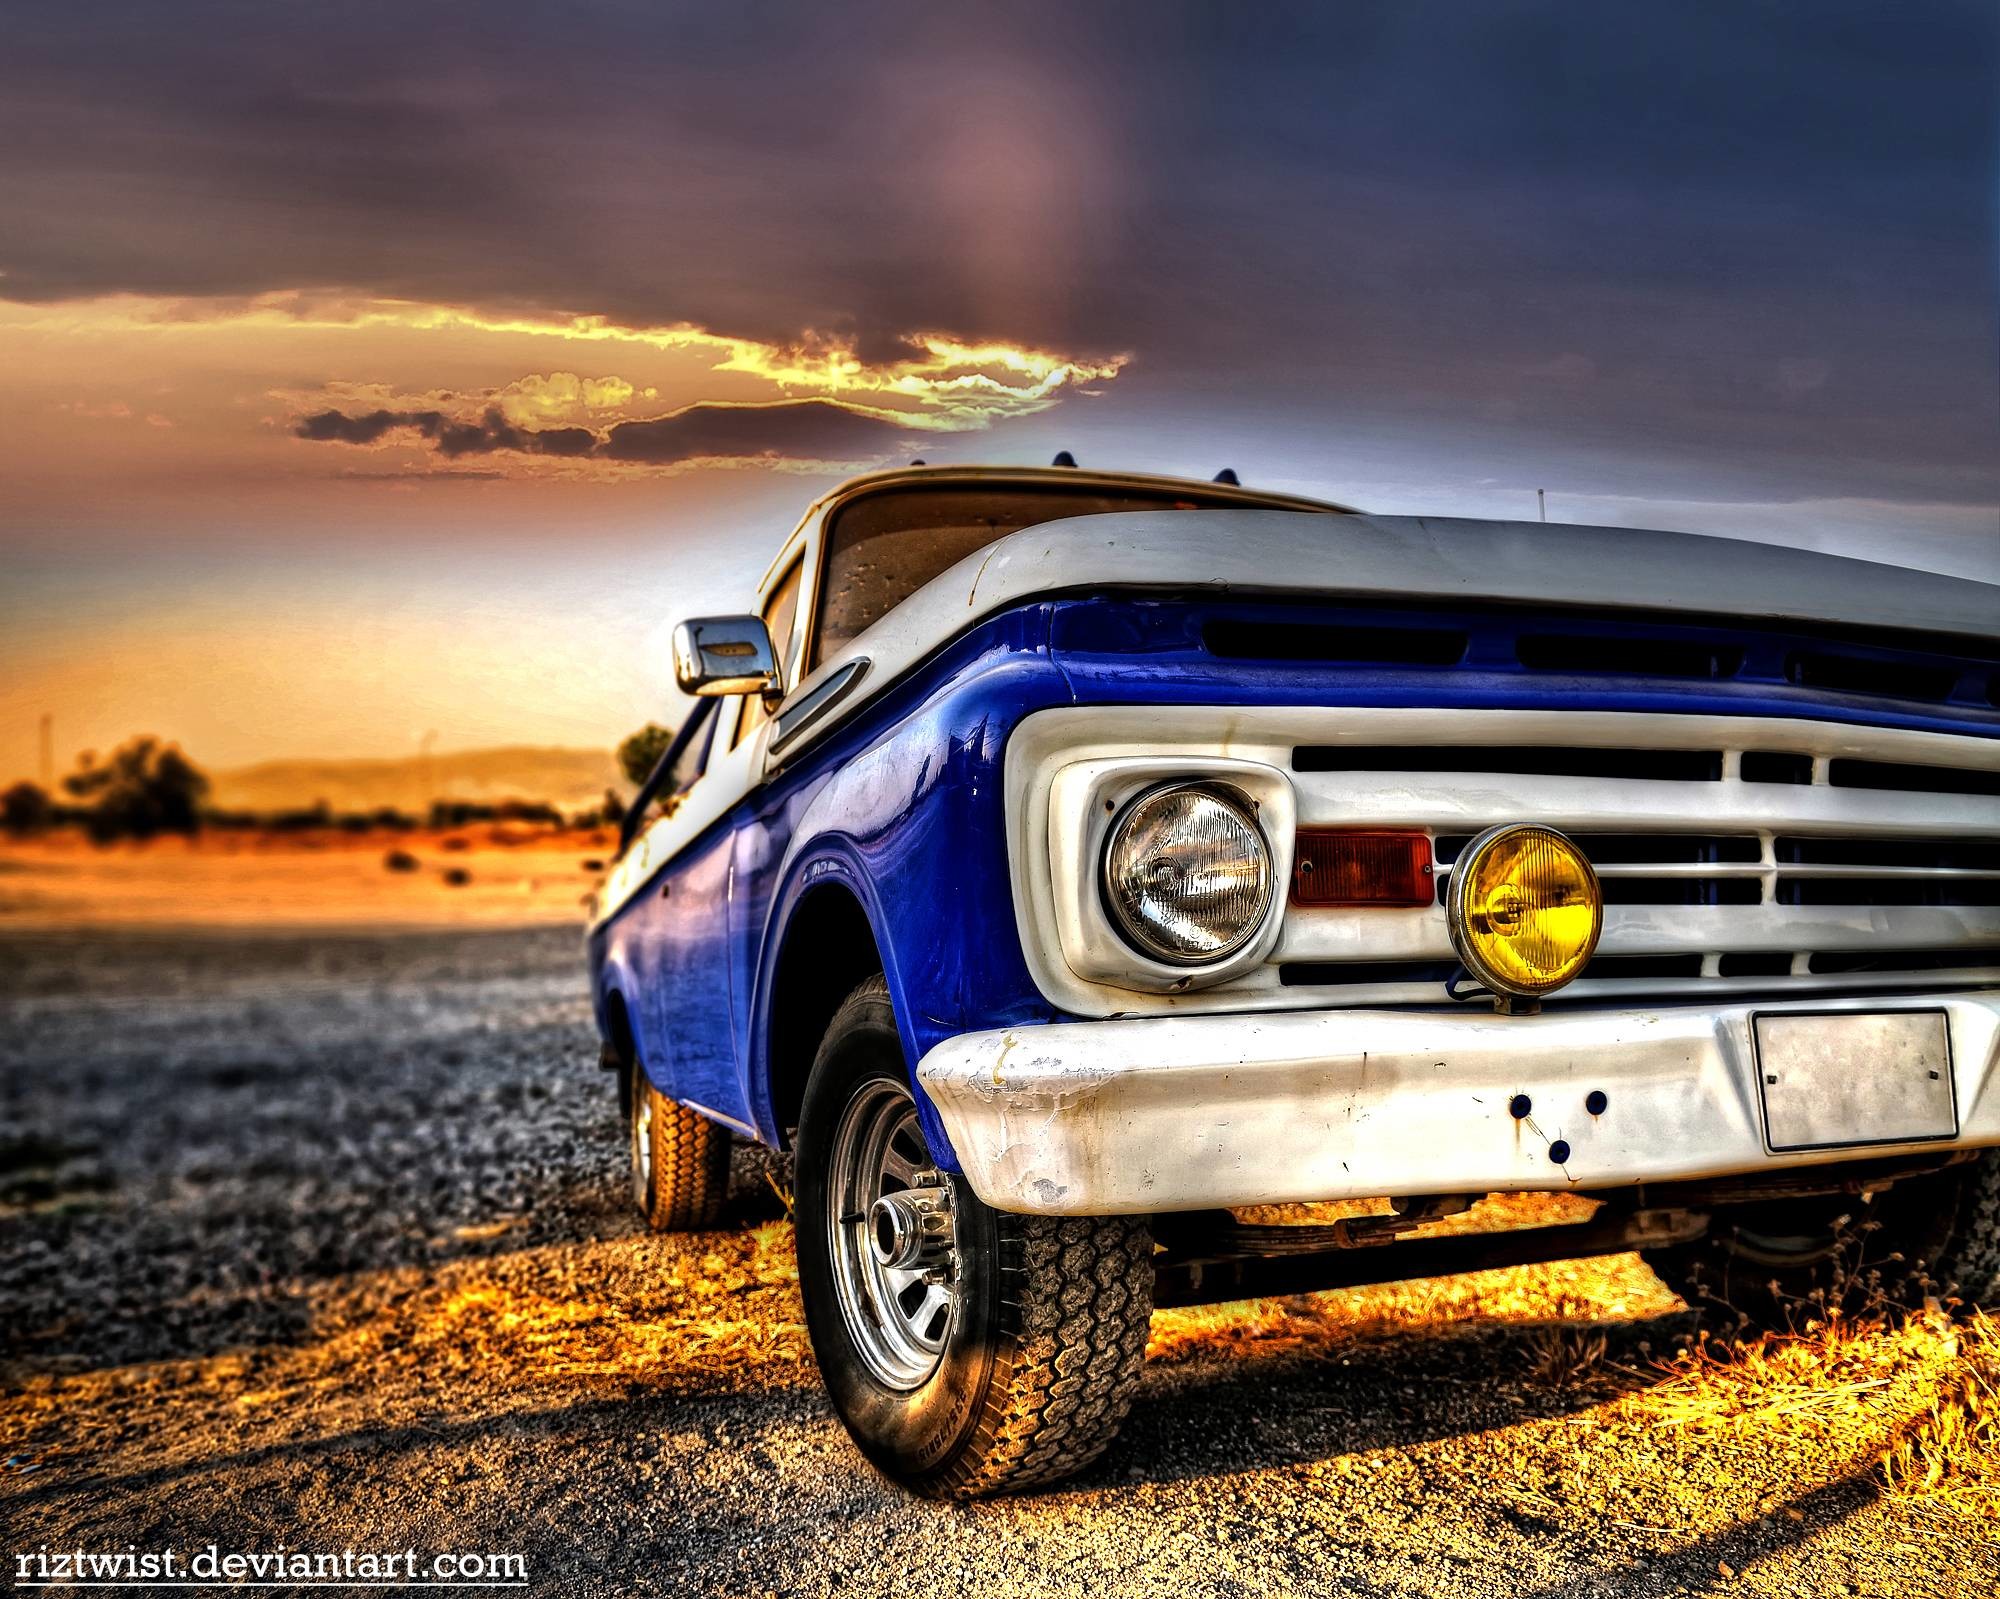 2000x1599 Pickup Truck Wallpapers | HD Wallpapers Base